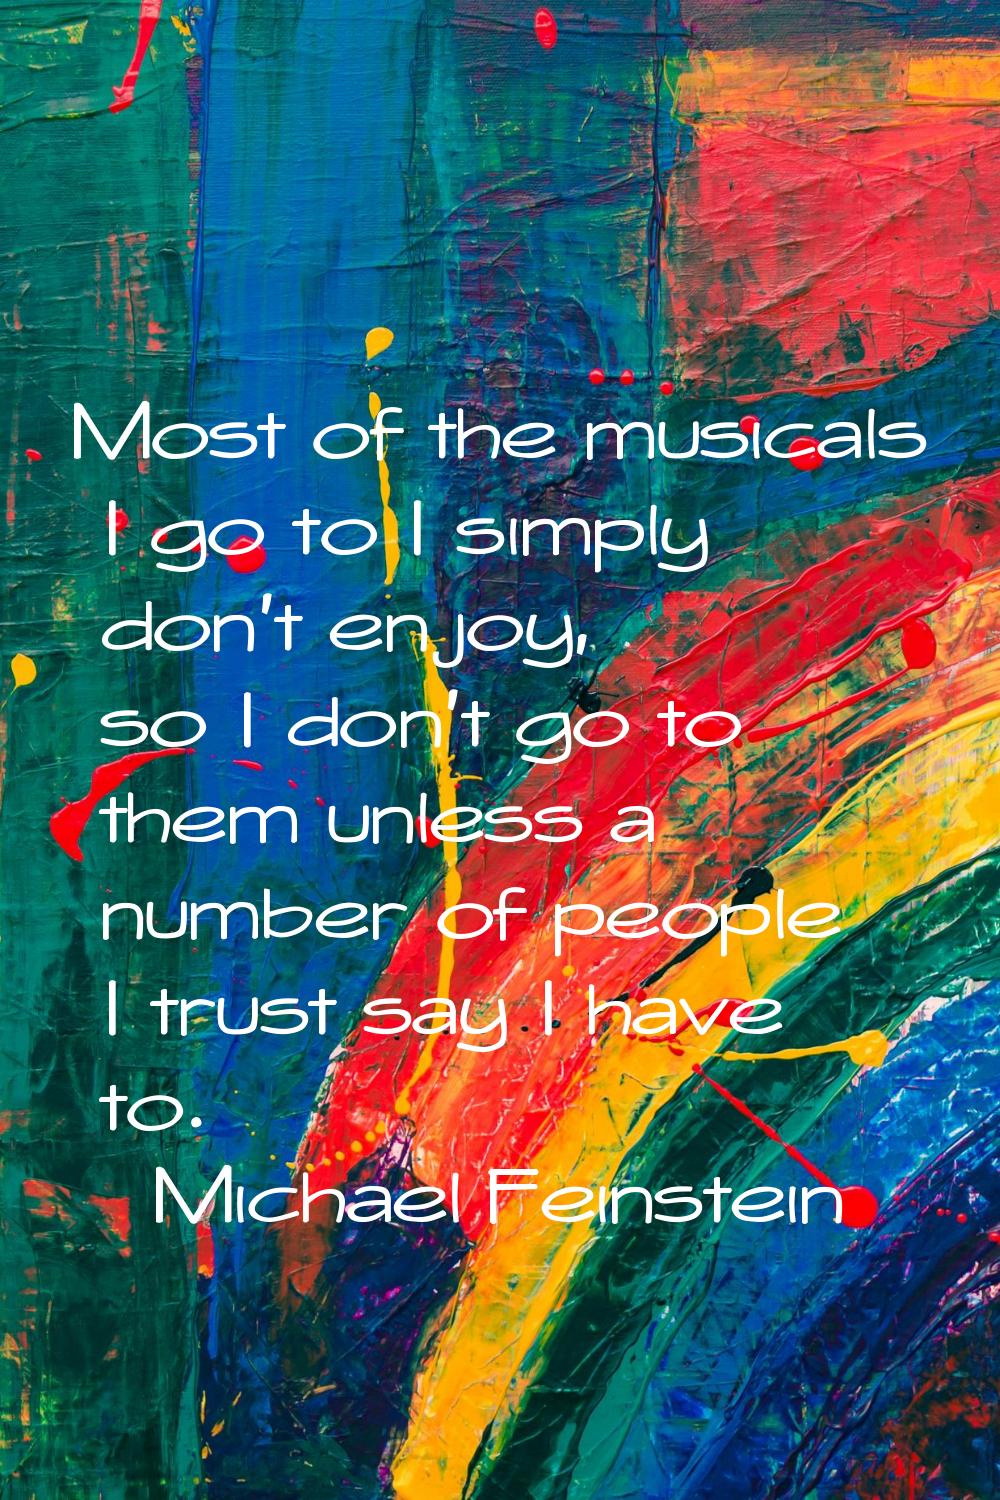 Most of the musicals I go to I simply don't enjoy, so I don't go to them unless a number of people 